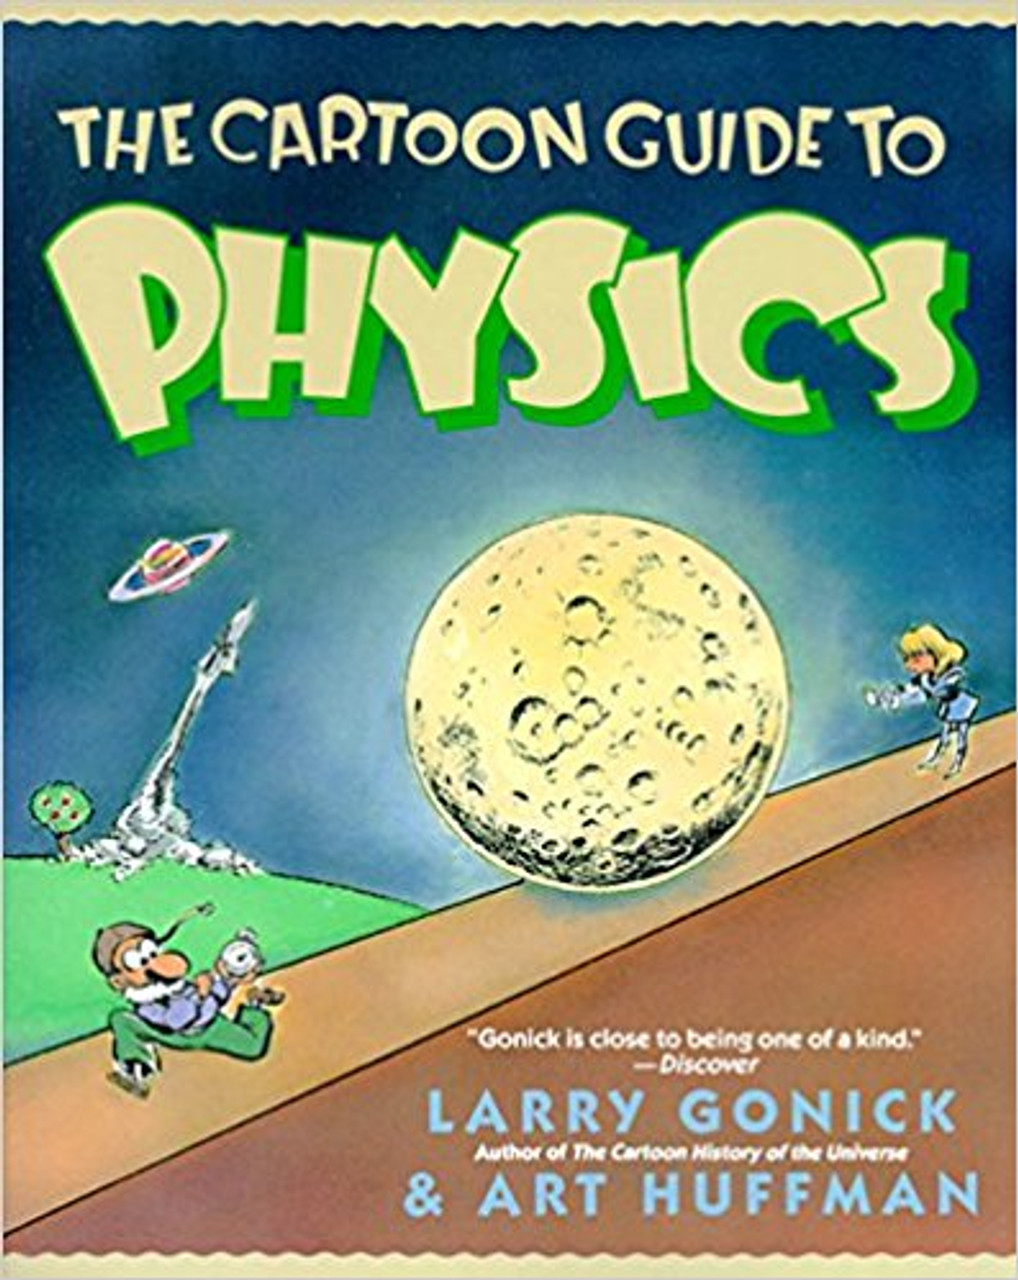  From the author of the bestselling The Cartoon History of the Universe--a refreshingly humorous and effective cartoon explanation of the principles of physics.